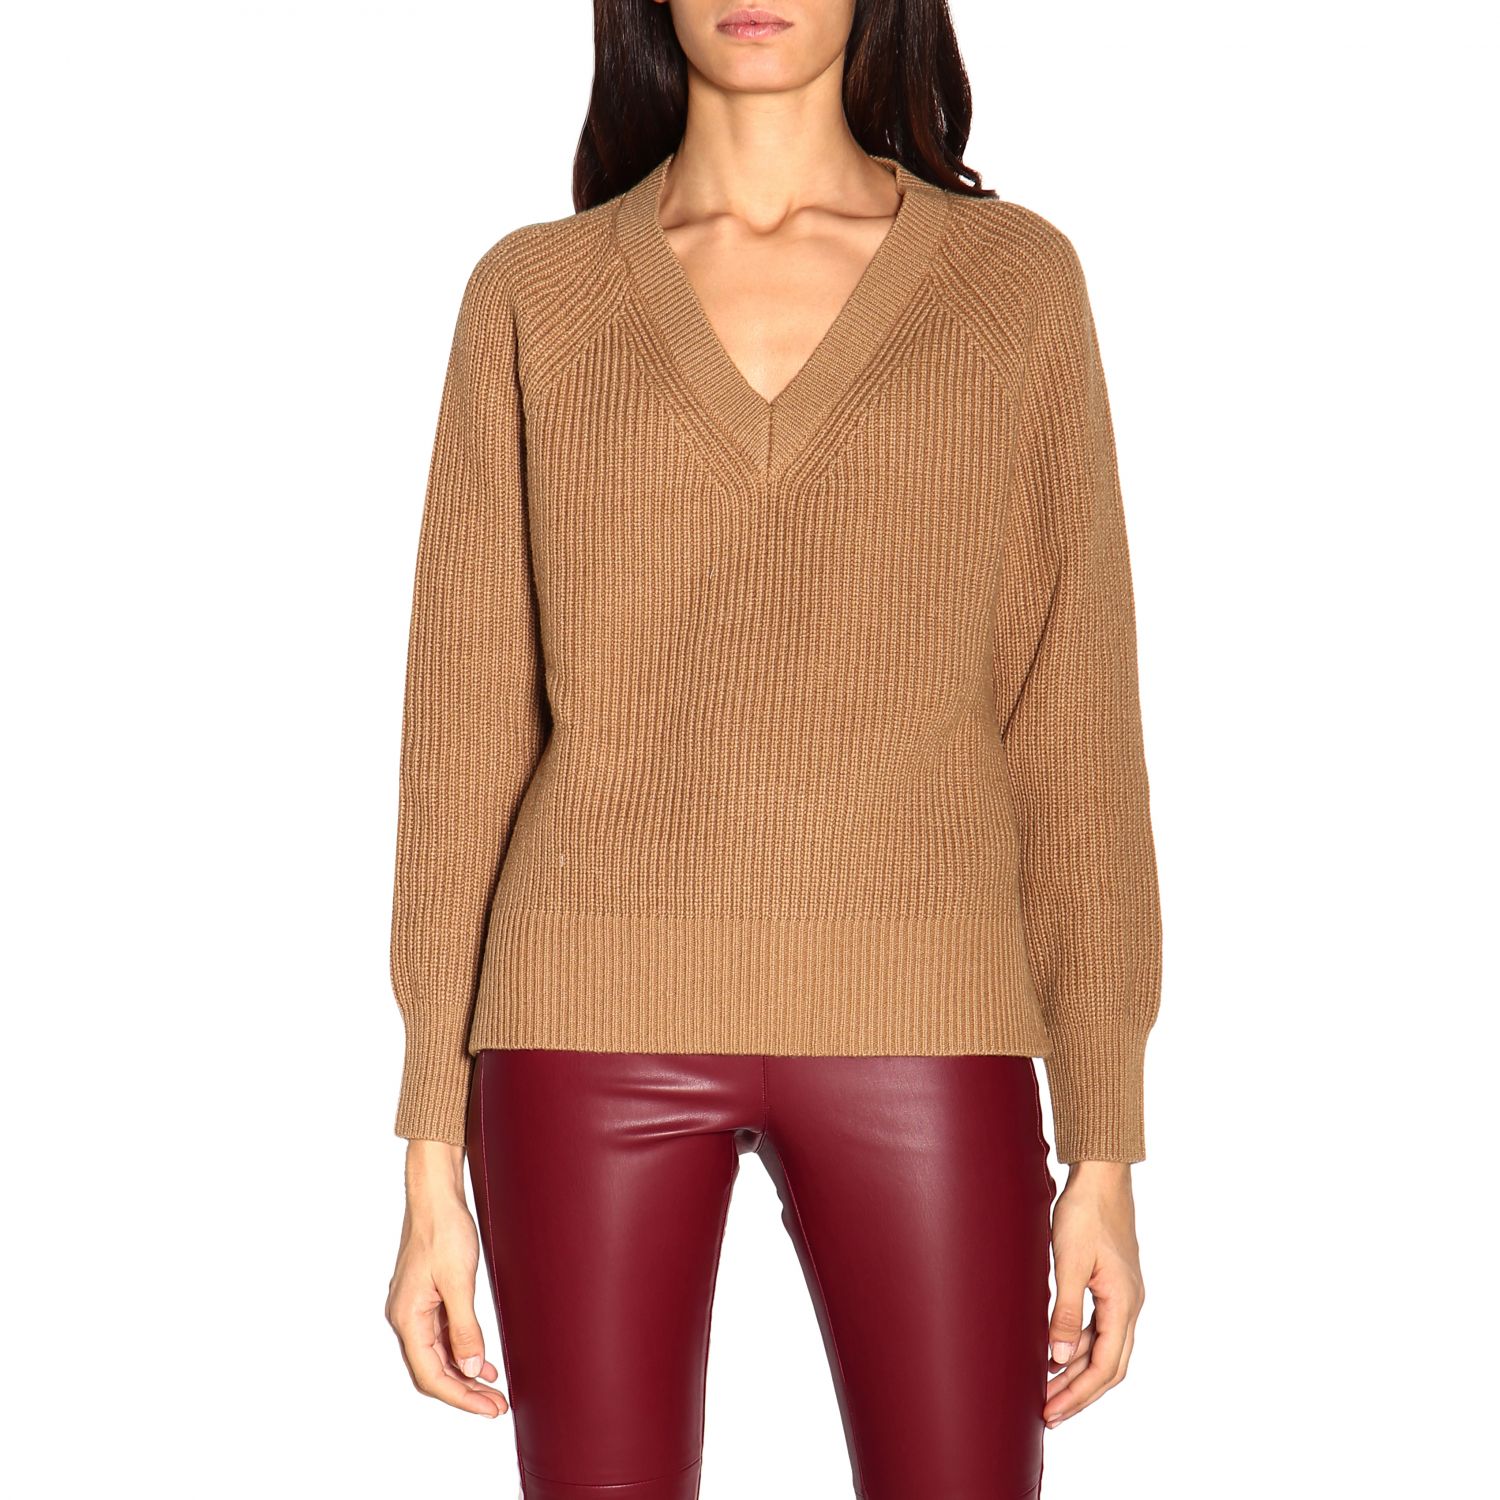 Michael Kors Outlet: sweater for woman - Fa01 | Michael Kors sweater ...